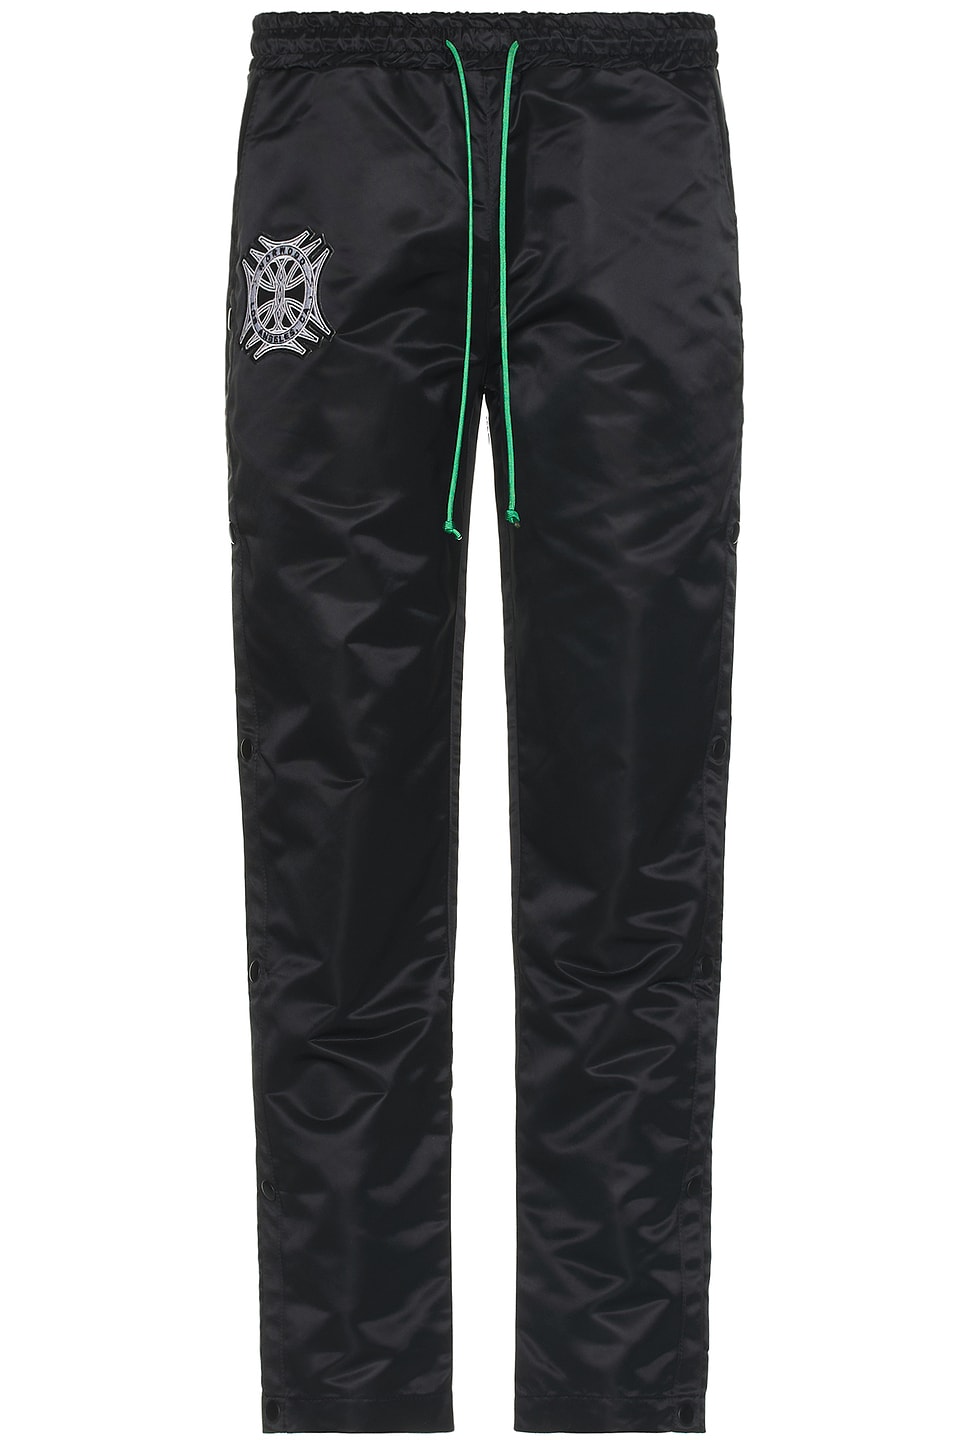 Image 1 of Norwood Nor Shield Snap Pant in Black